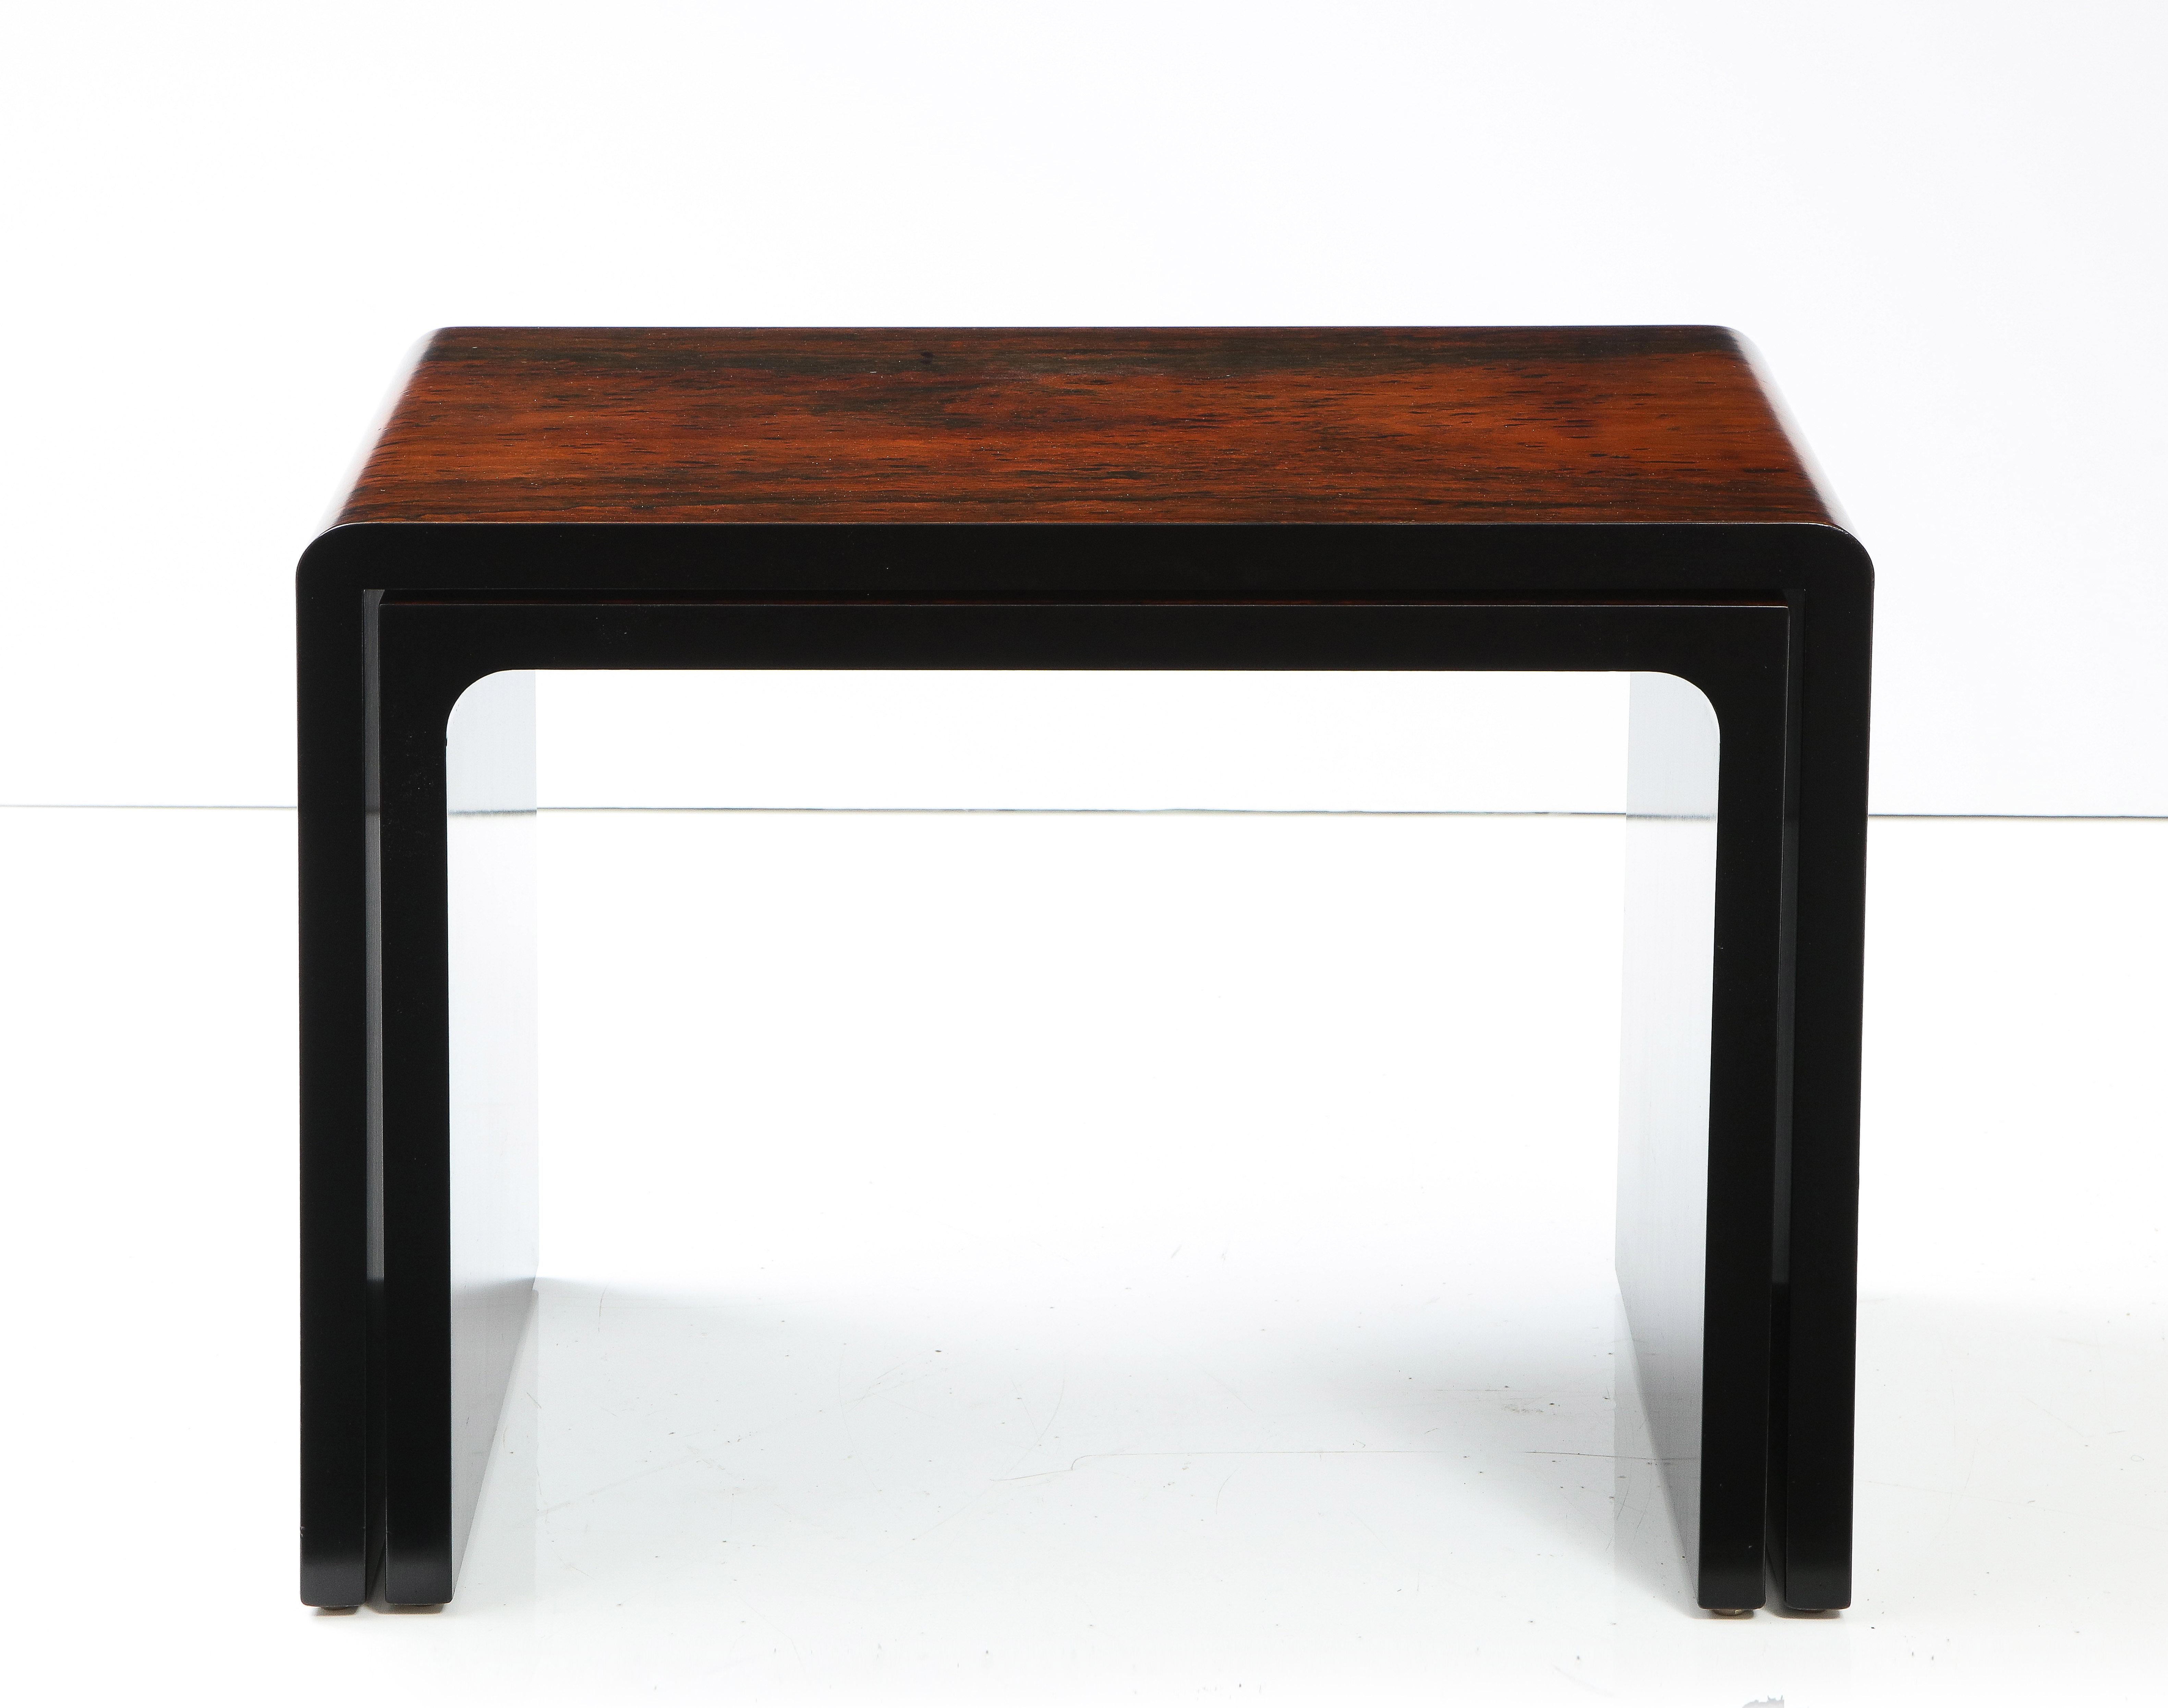 Set of Italian Rosewood and Ebony Lacquered Nesting Tables, circa 1970 For Sale 1